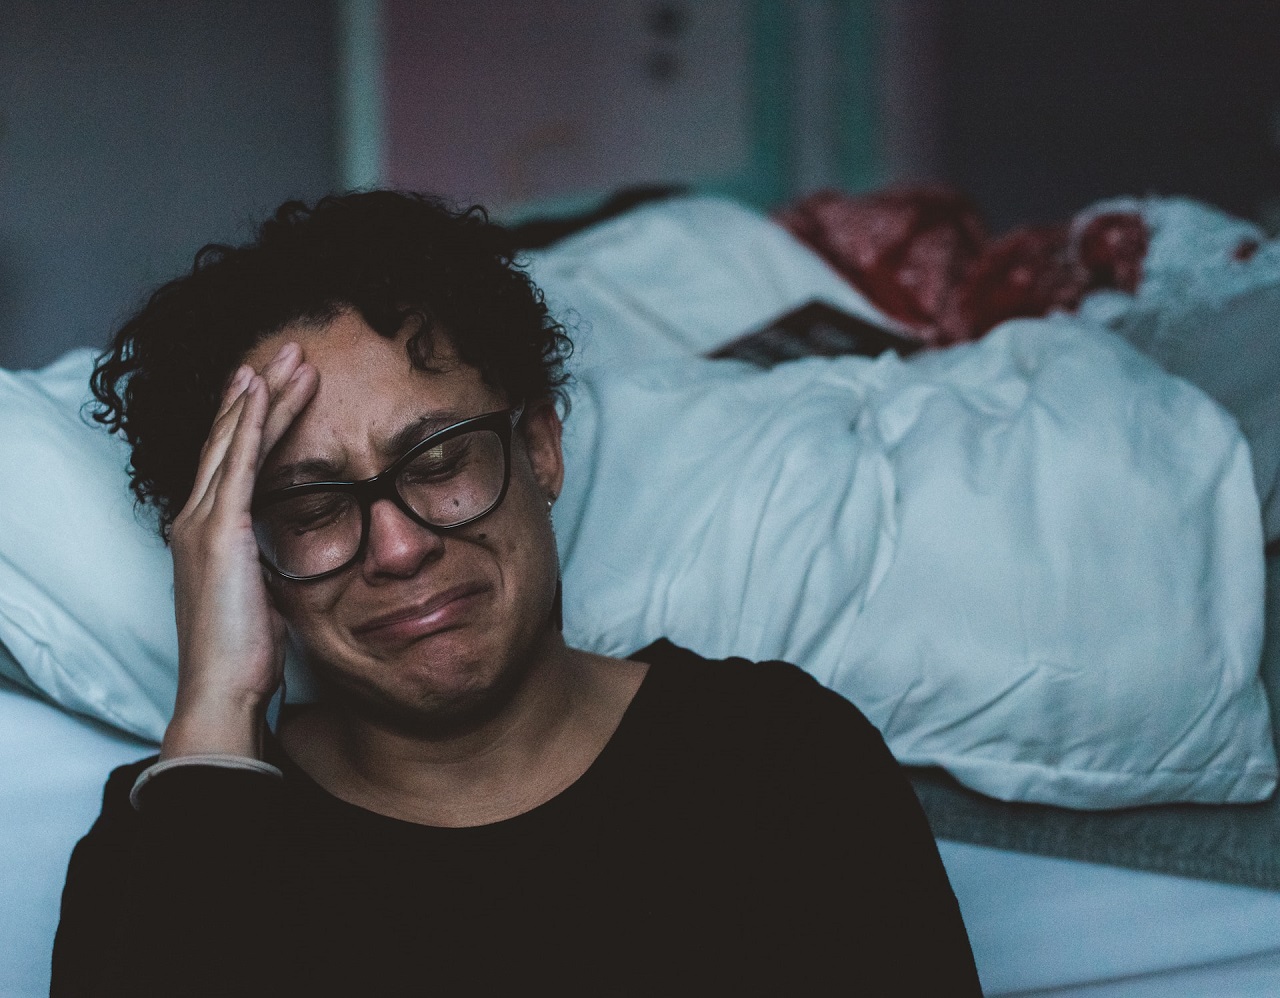 A black woman with glasses sitting on the floor with her back against the bed and crying